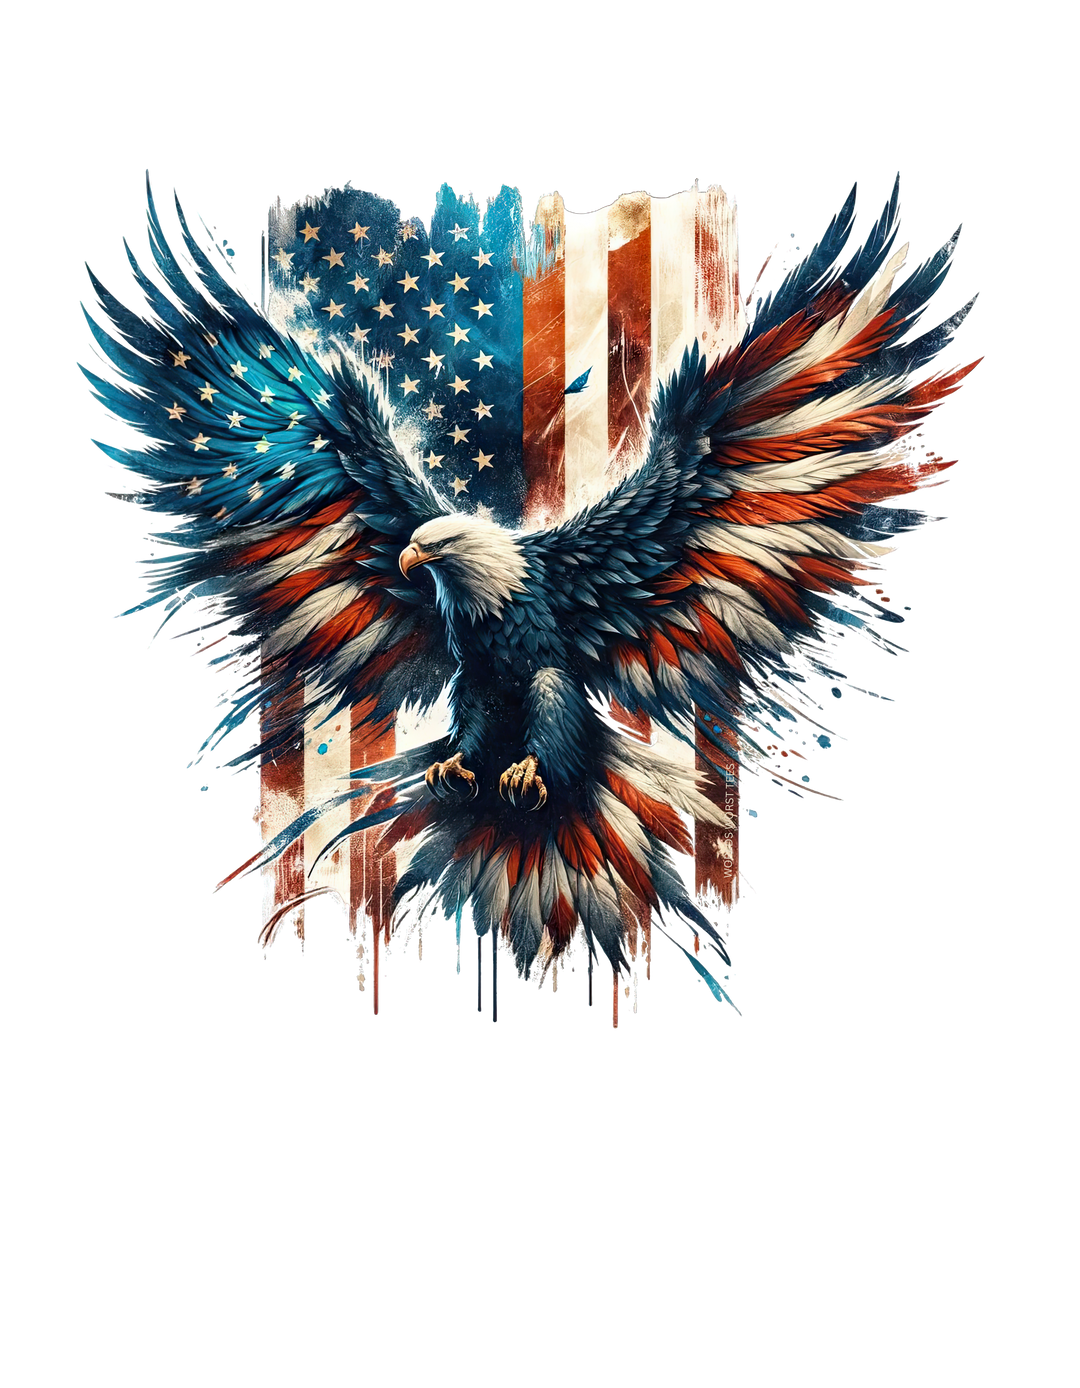 American Eagle Tee: A relaxed-fit t-shirt featuring a painting of an eagle with a flag, embodying patriotism and style. Made of 100% ring-spun cotton for comfort and durability. From Worlds Worst Tees.